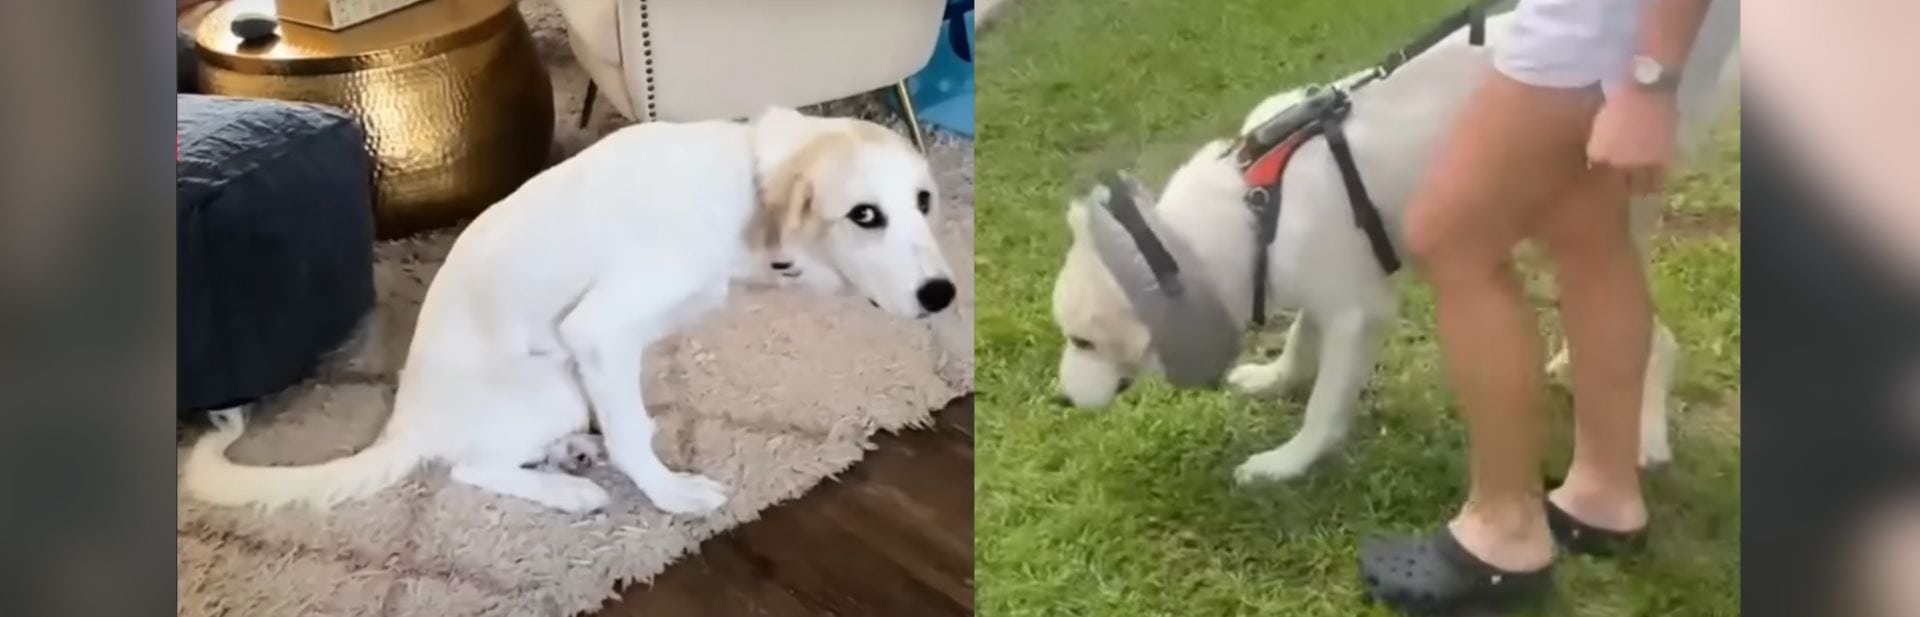 Disabled Puppy Overcomes A Painful Start With Help From Her Rescuer